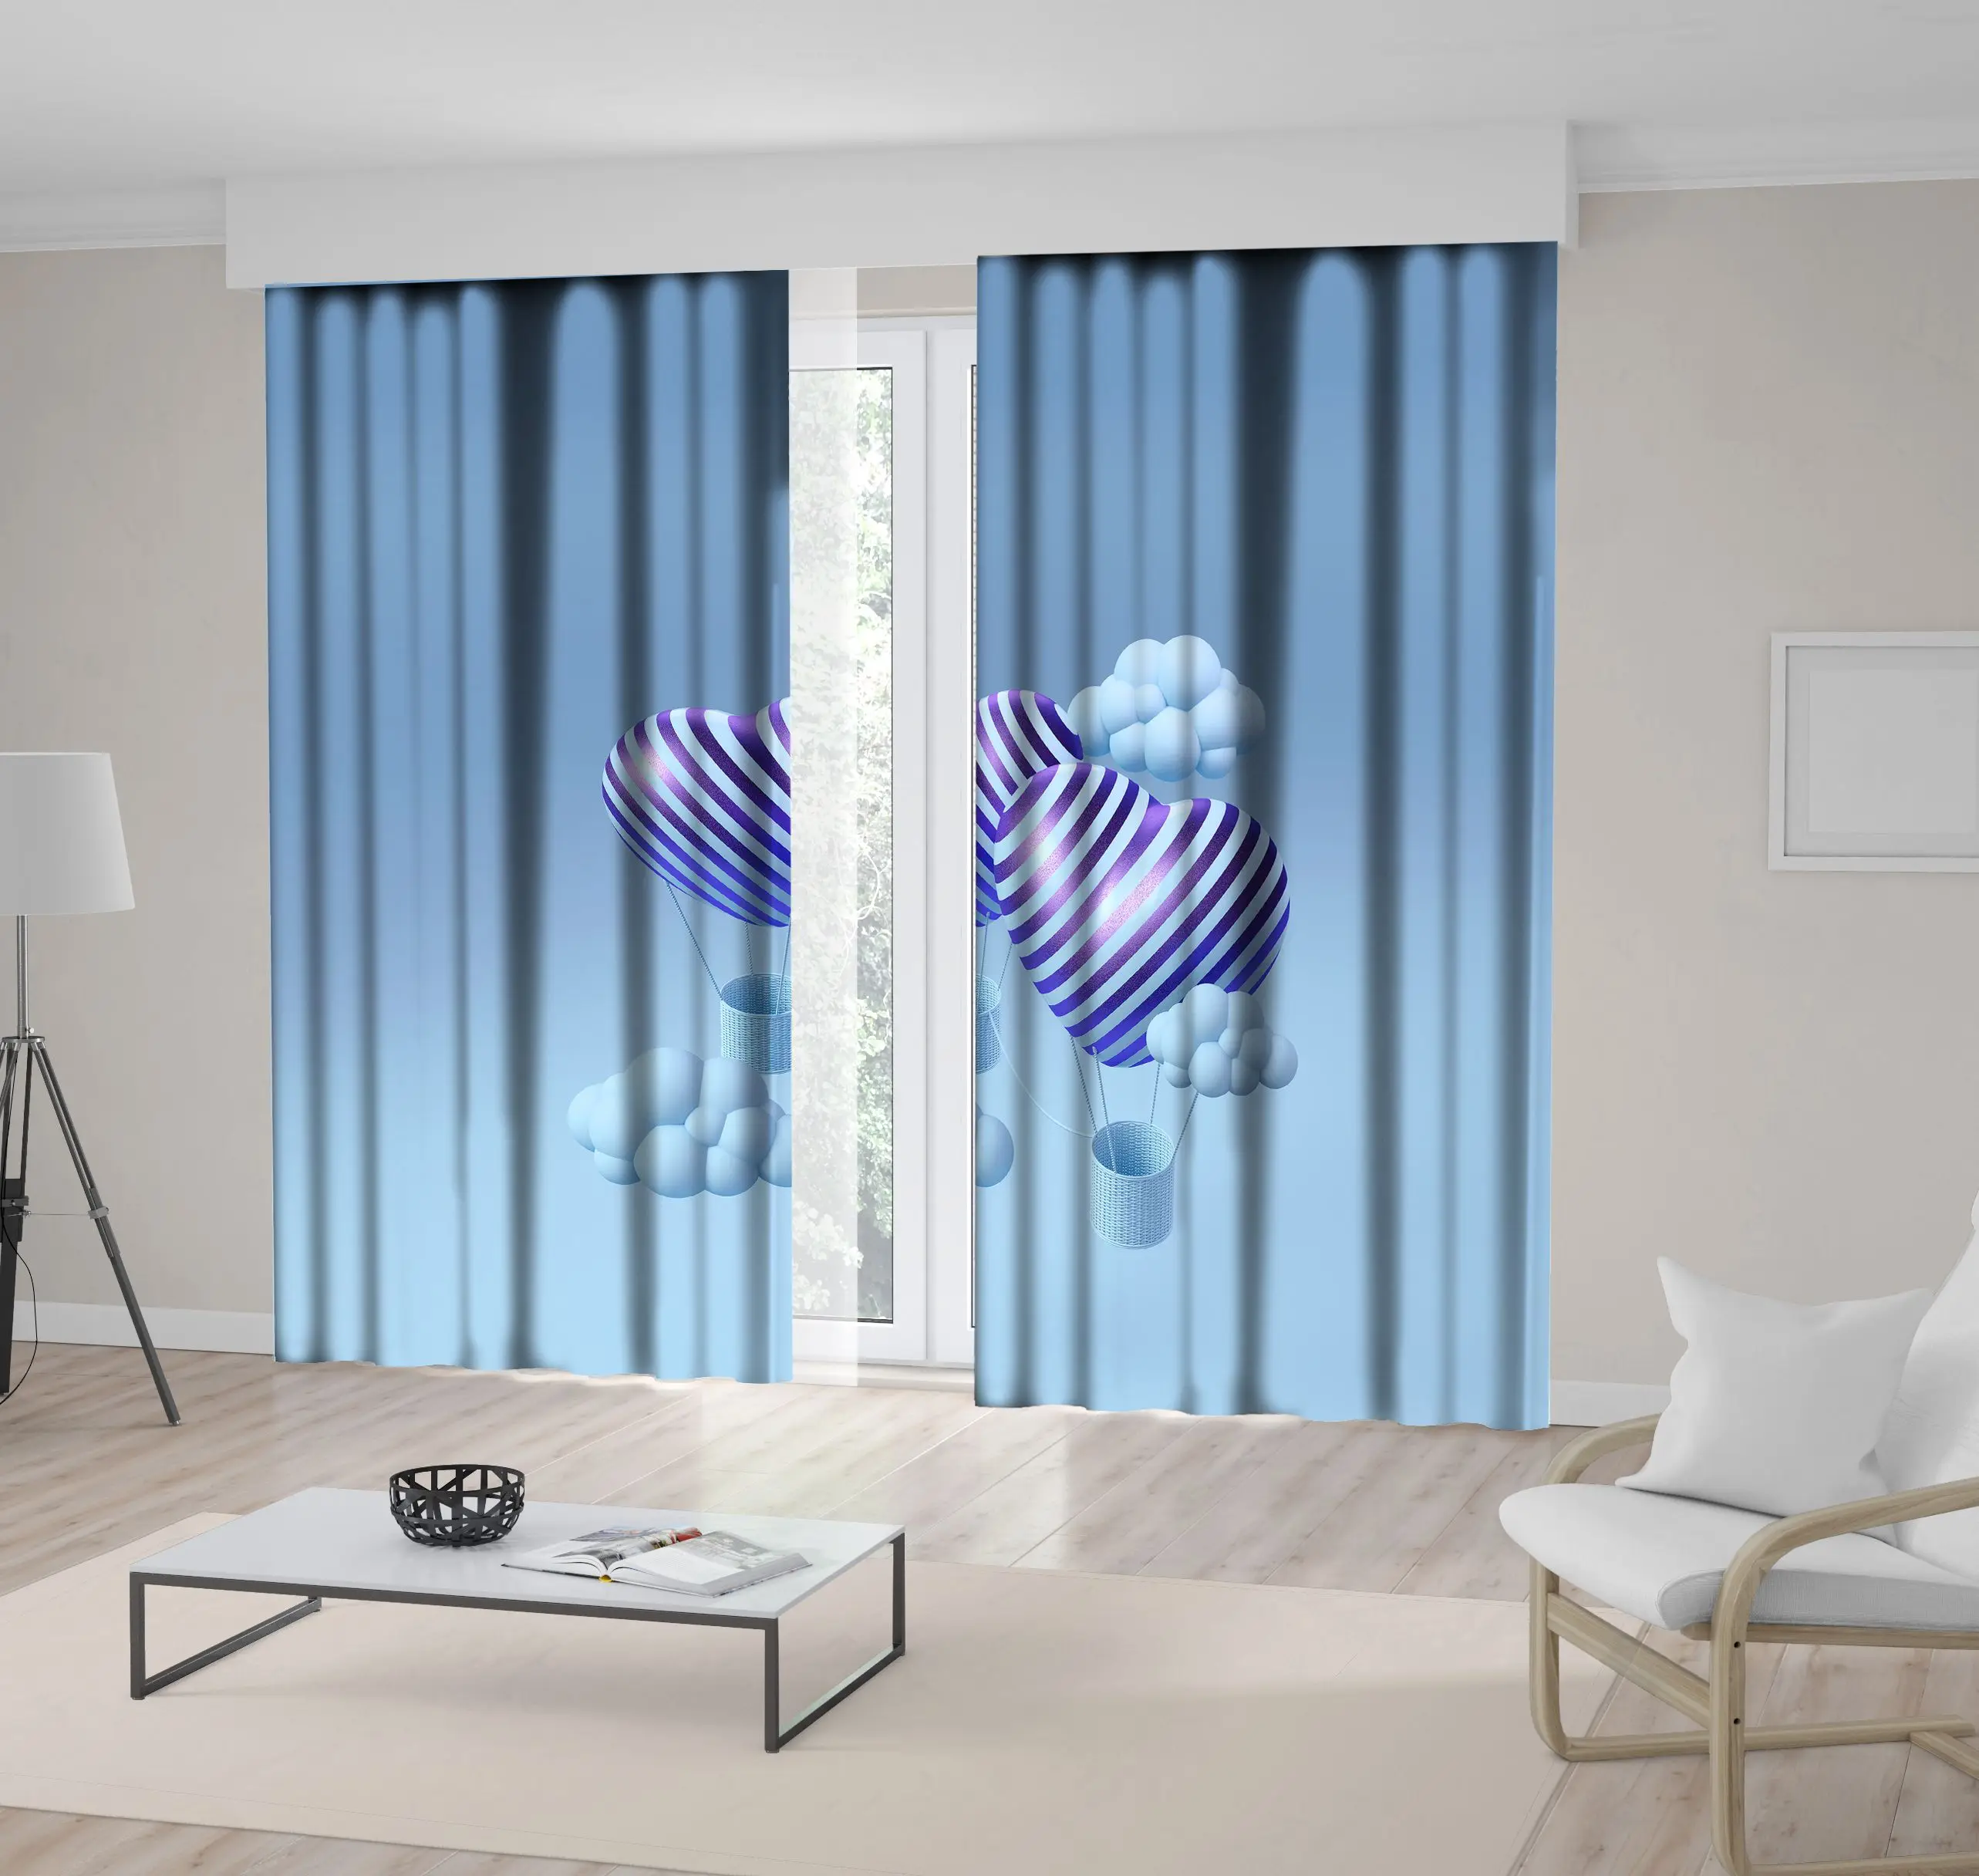 

Curtain Travel with Love Hot Air Balloons Flying Among Clouds Romantic Dreamy Artwork Printed Blue